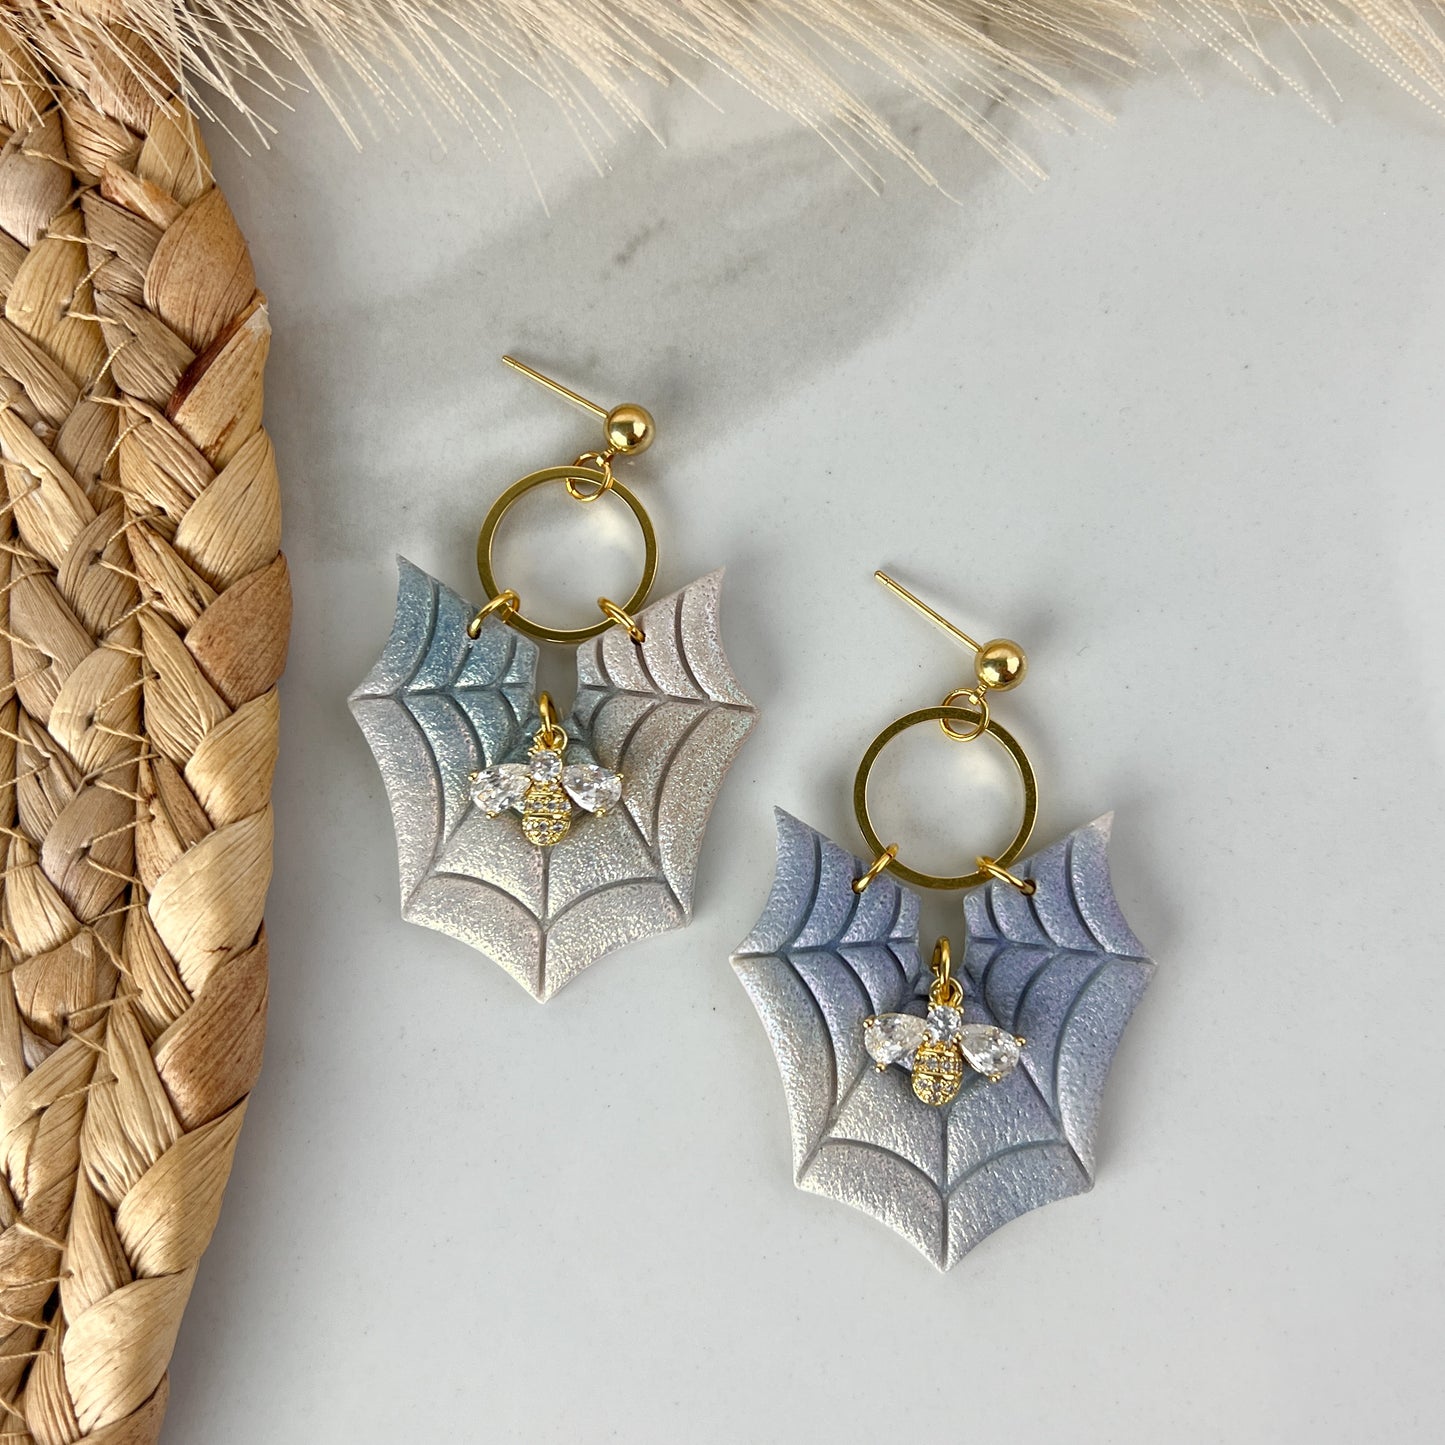 Bee in Spider Web Day and Night Halloween/ Fall Collection